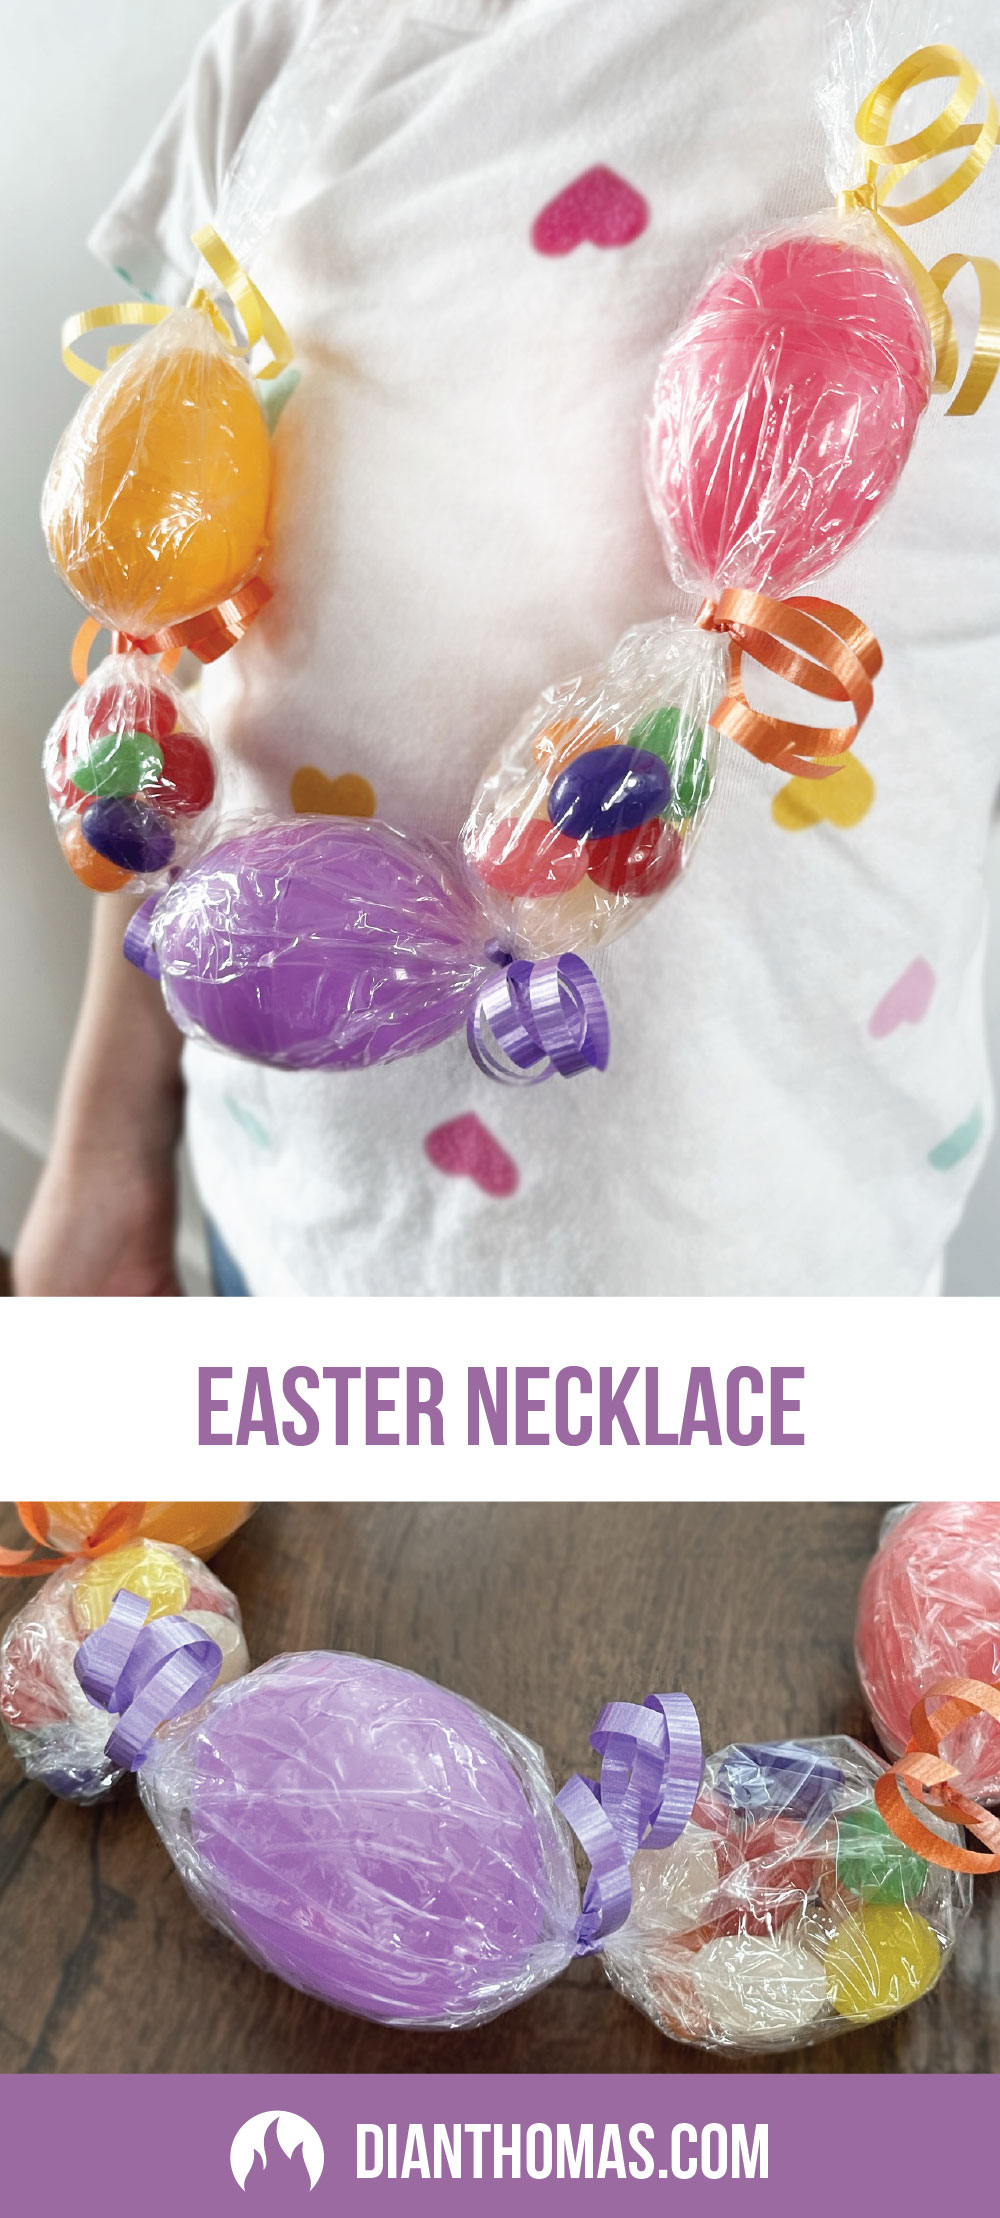 Create a beautiful necklace out of Easter eggs and candy jelly beans!